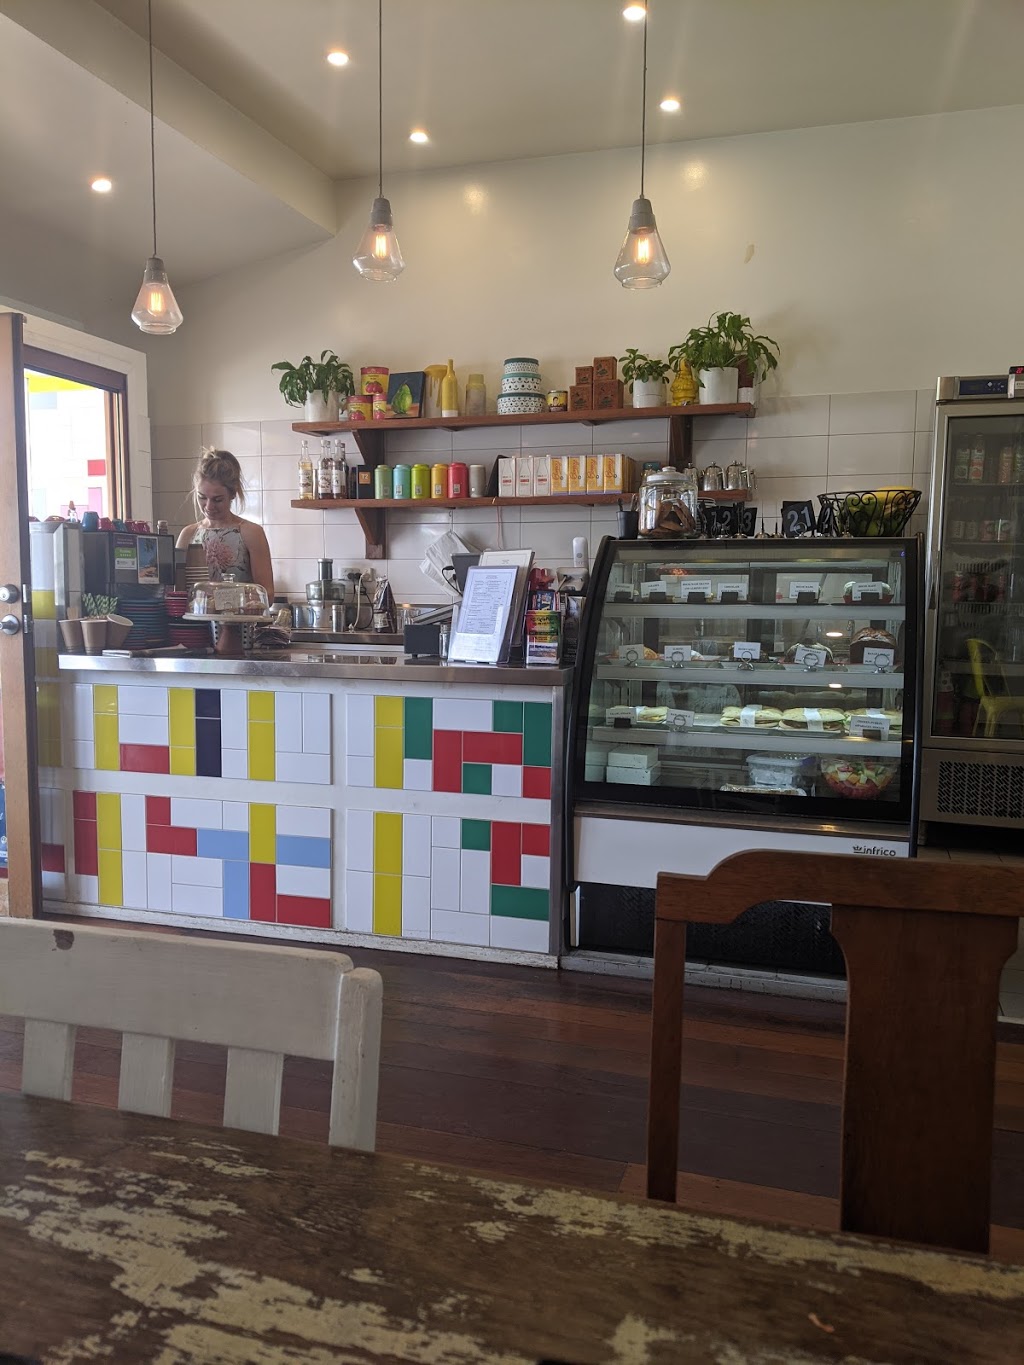 Ground Up Espresso | cafe | 120 Young St, Carrington NSW 2294, Australia | 0249610504 OR +61 2 4961 0504